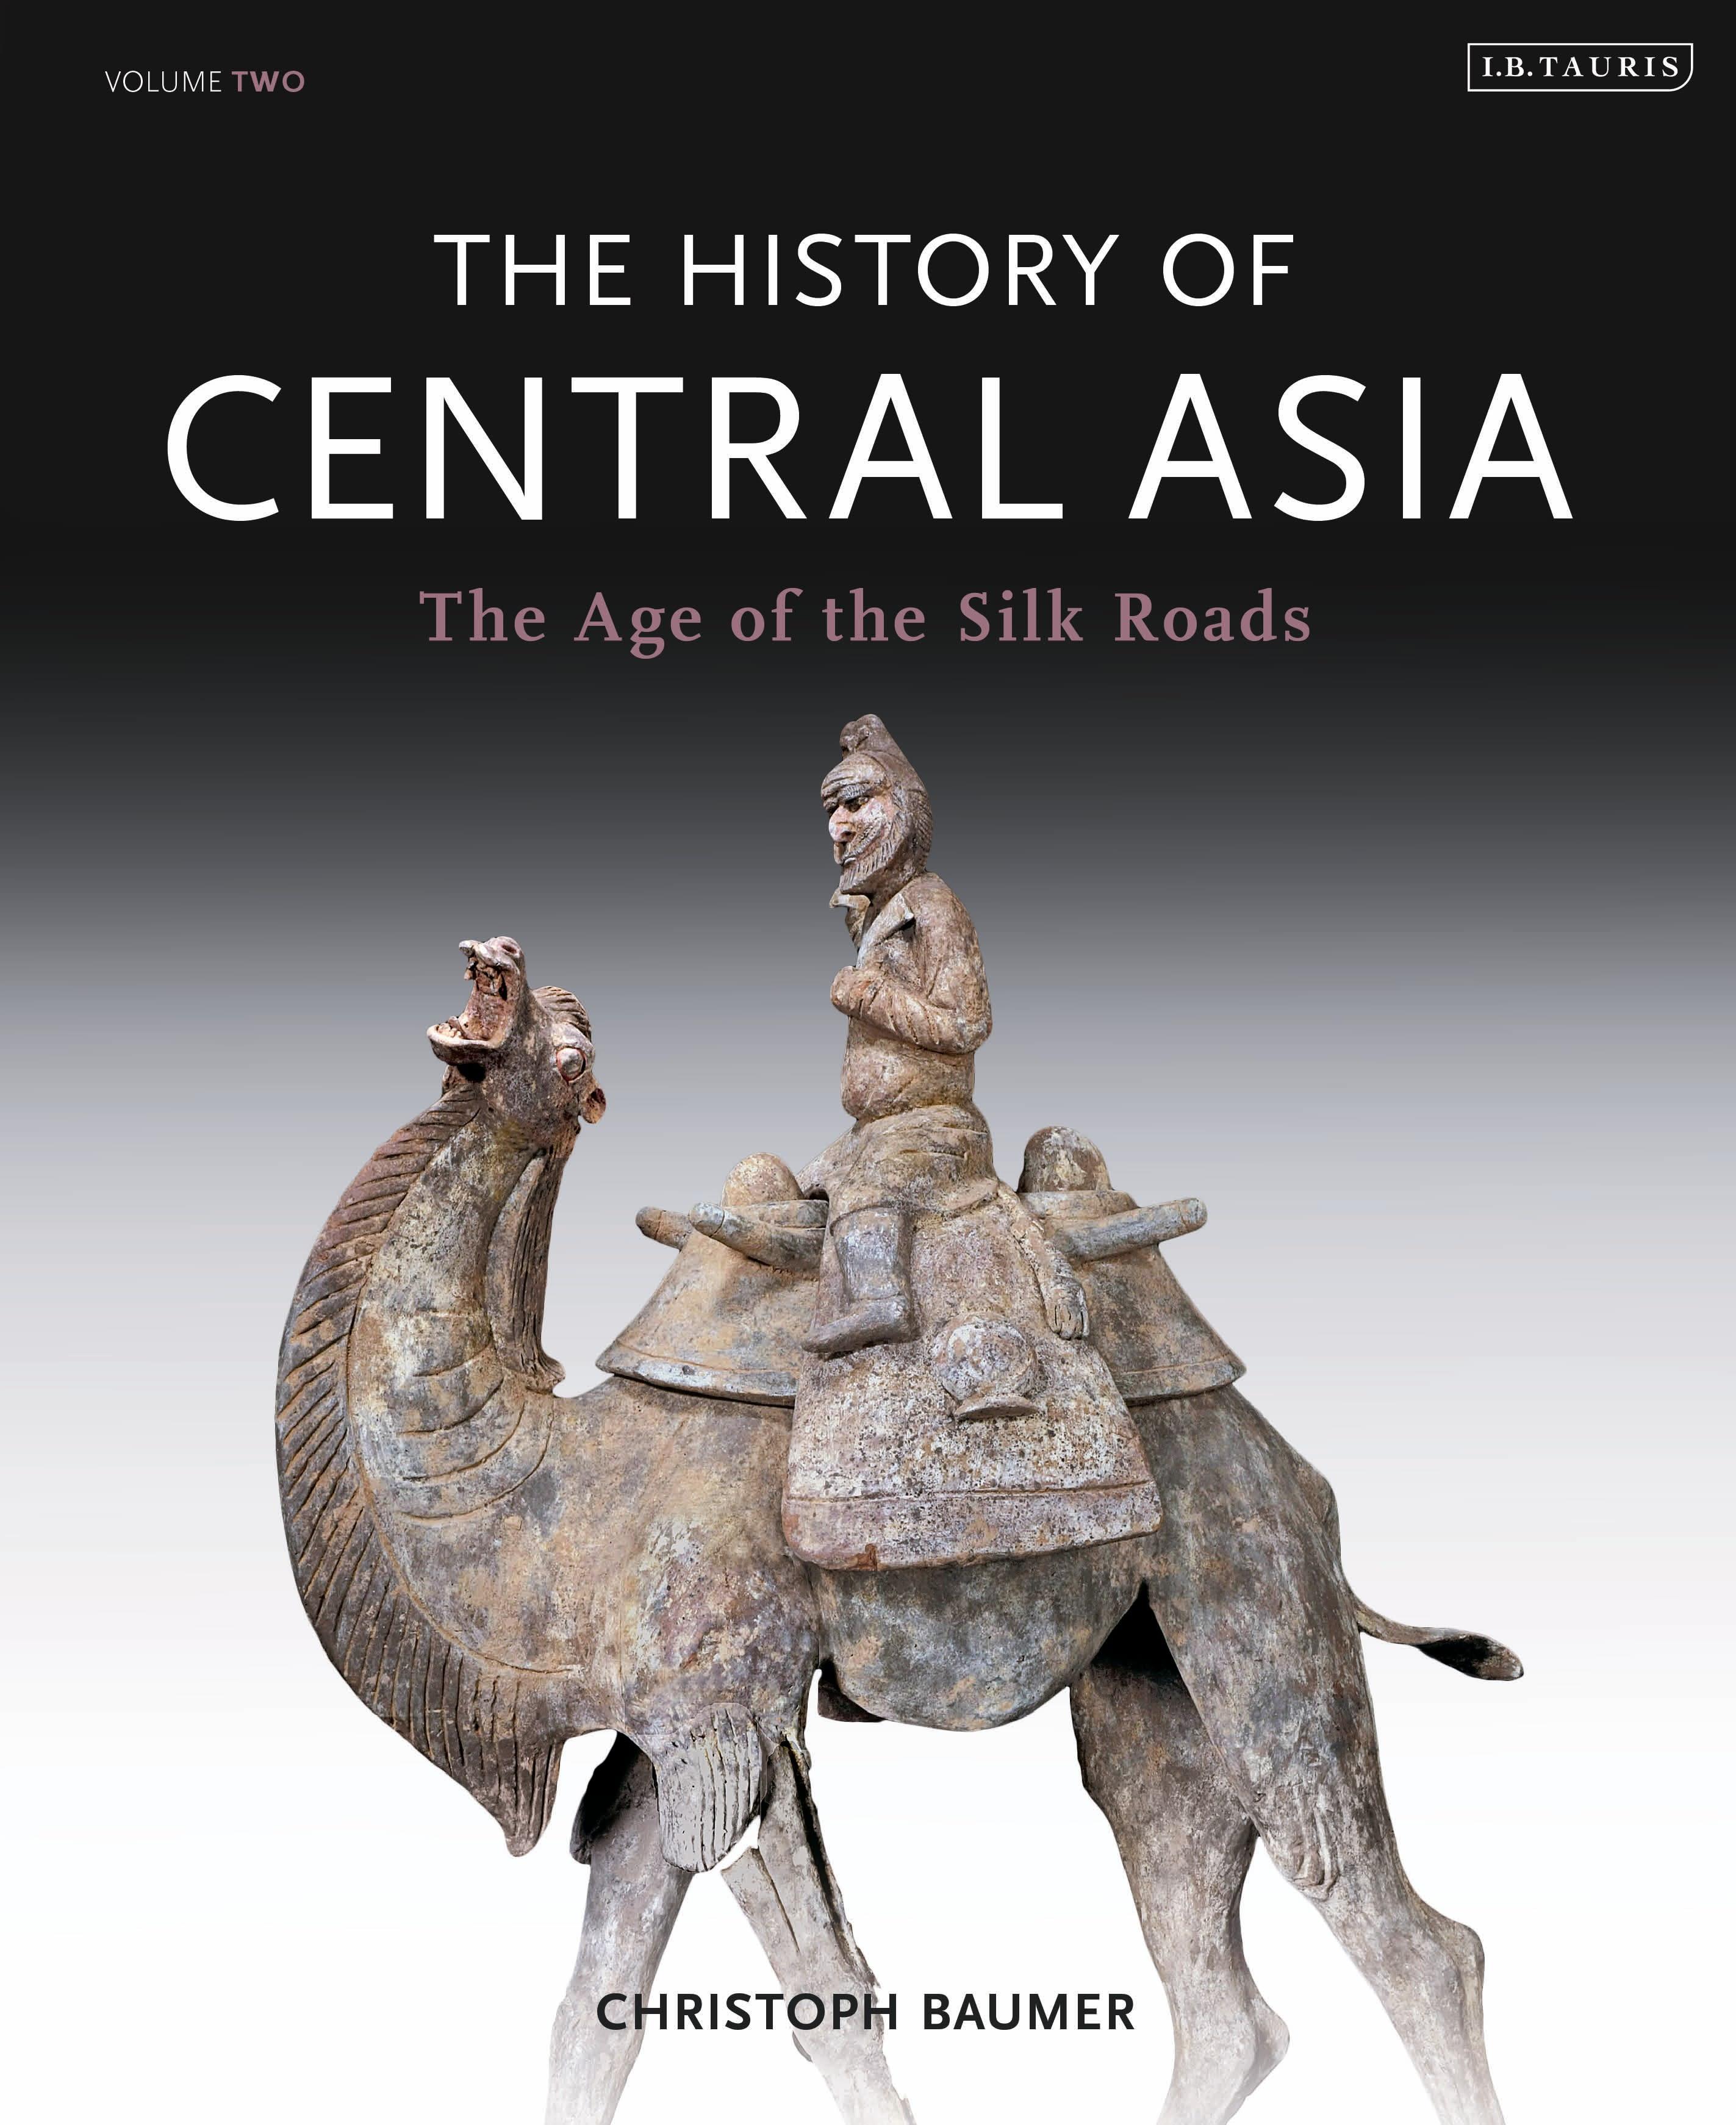 The History of Central Asia / The Age of the Silk Roads / Christoph Baumer / Buch / Gebunden / Englisch / 2014 / Bloomsbury Publishing PLC / EAN 9781780768328 - Baumer, Christoph